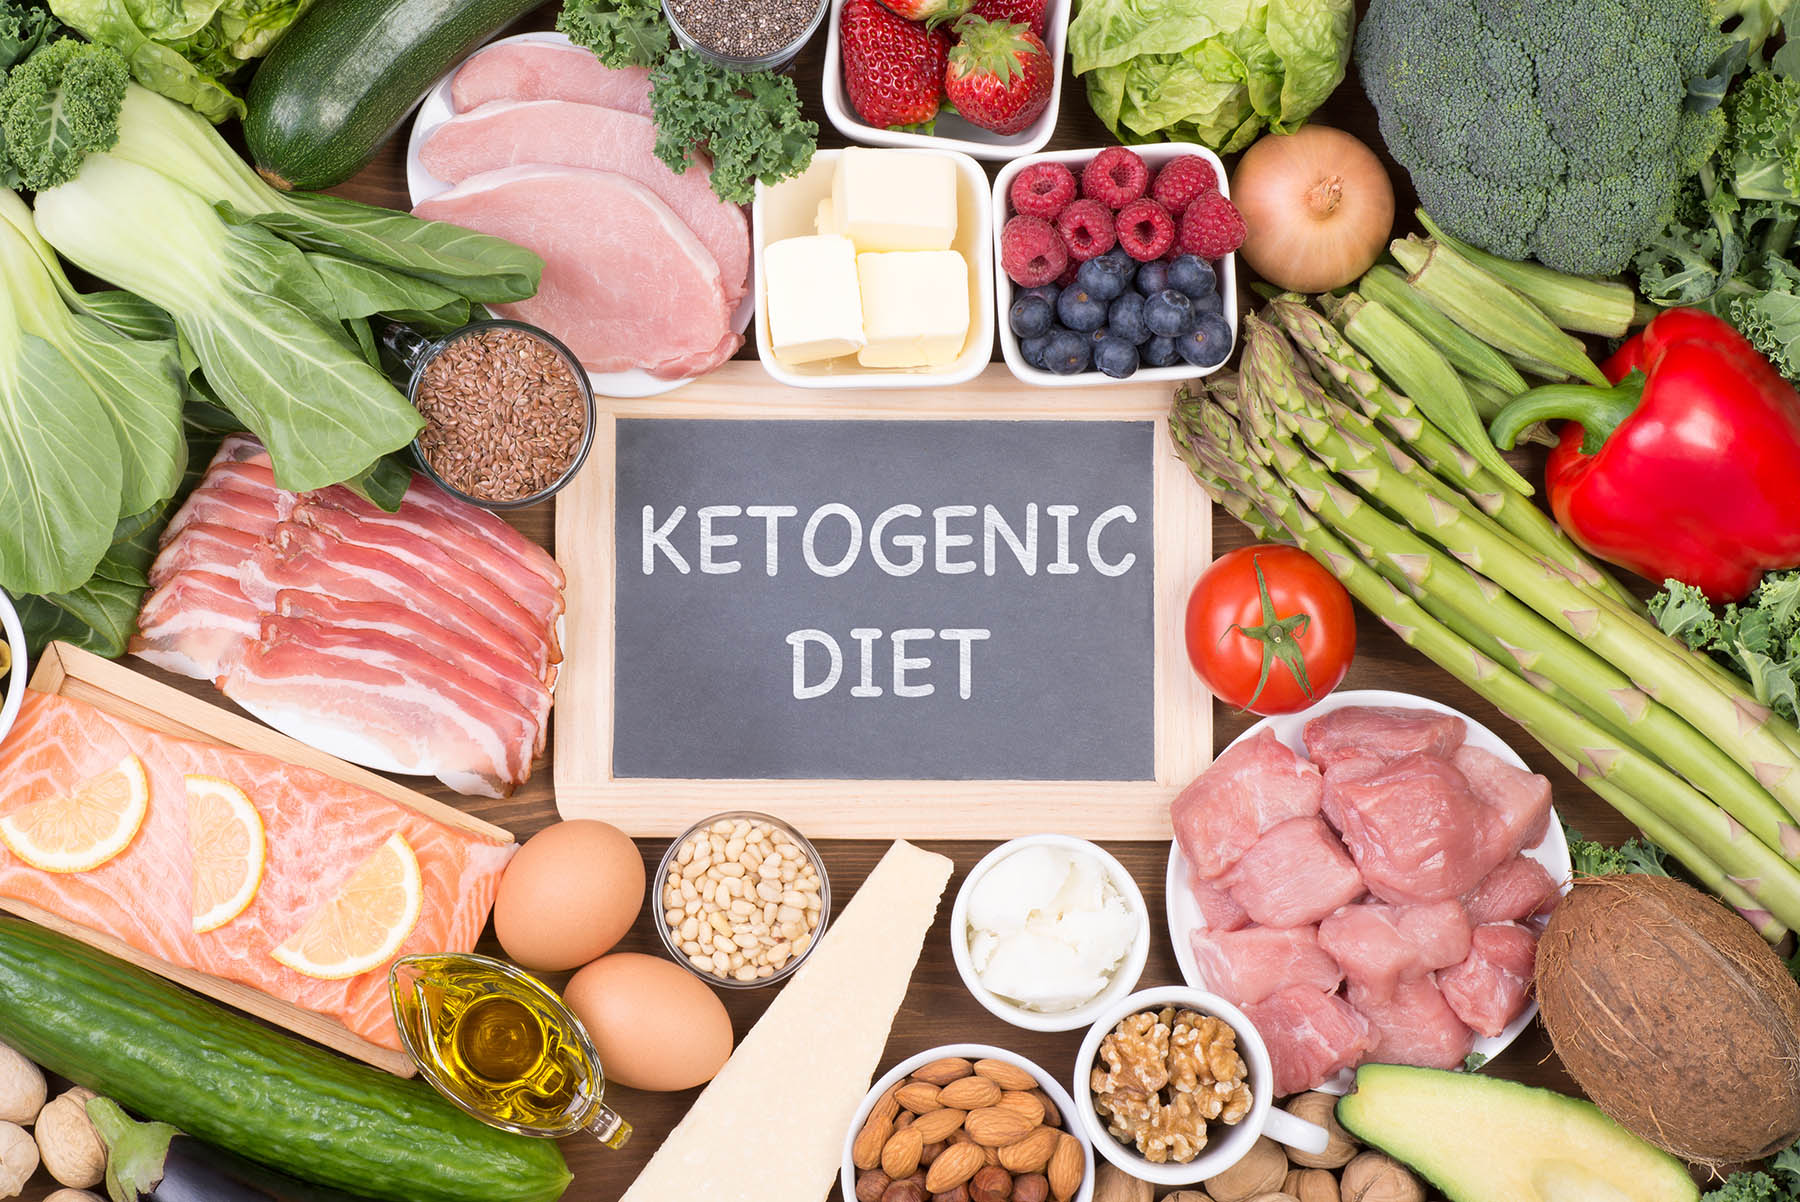 Ketogenic Diet and Diabetes: Pros, Cons, and Safety Tips